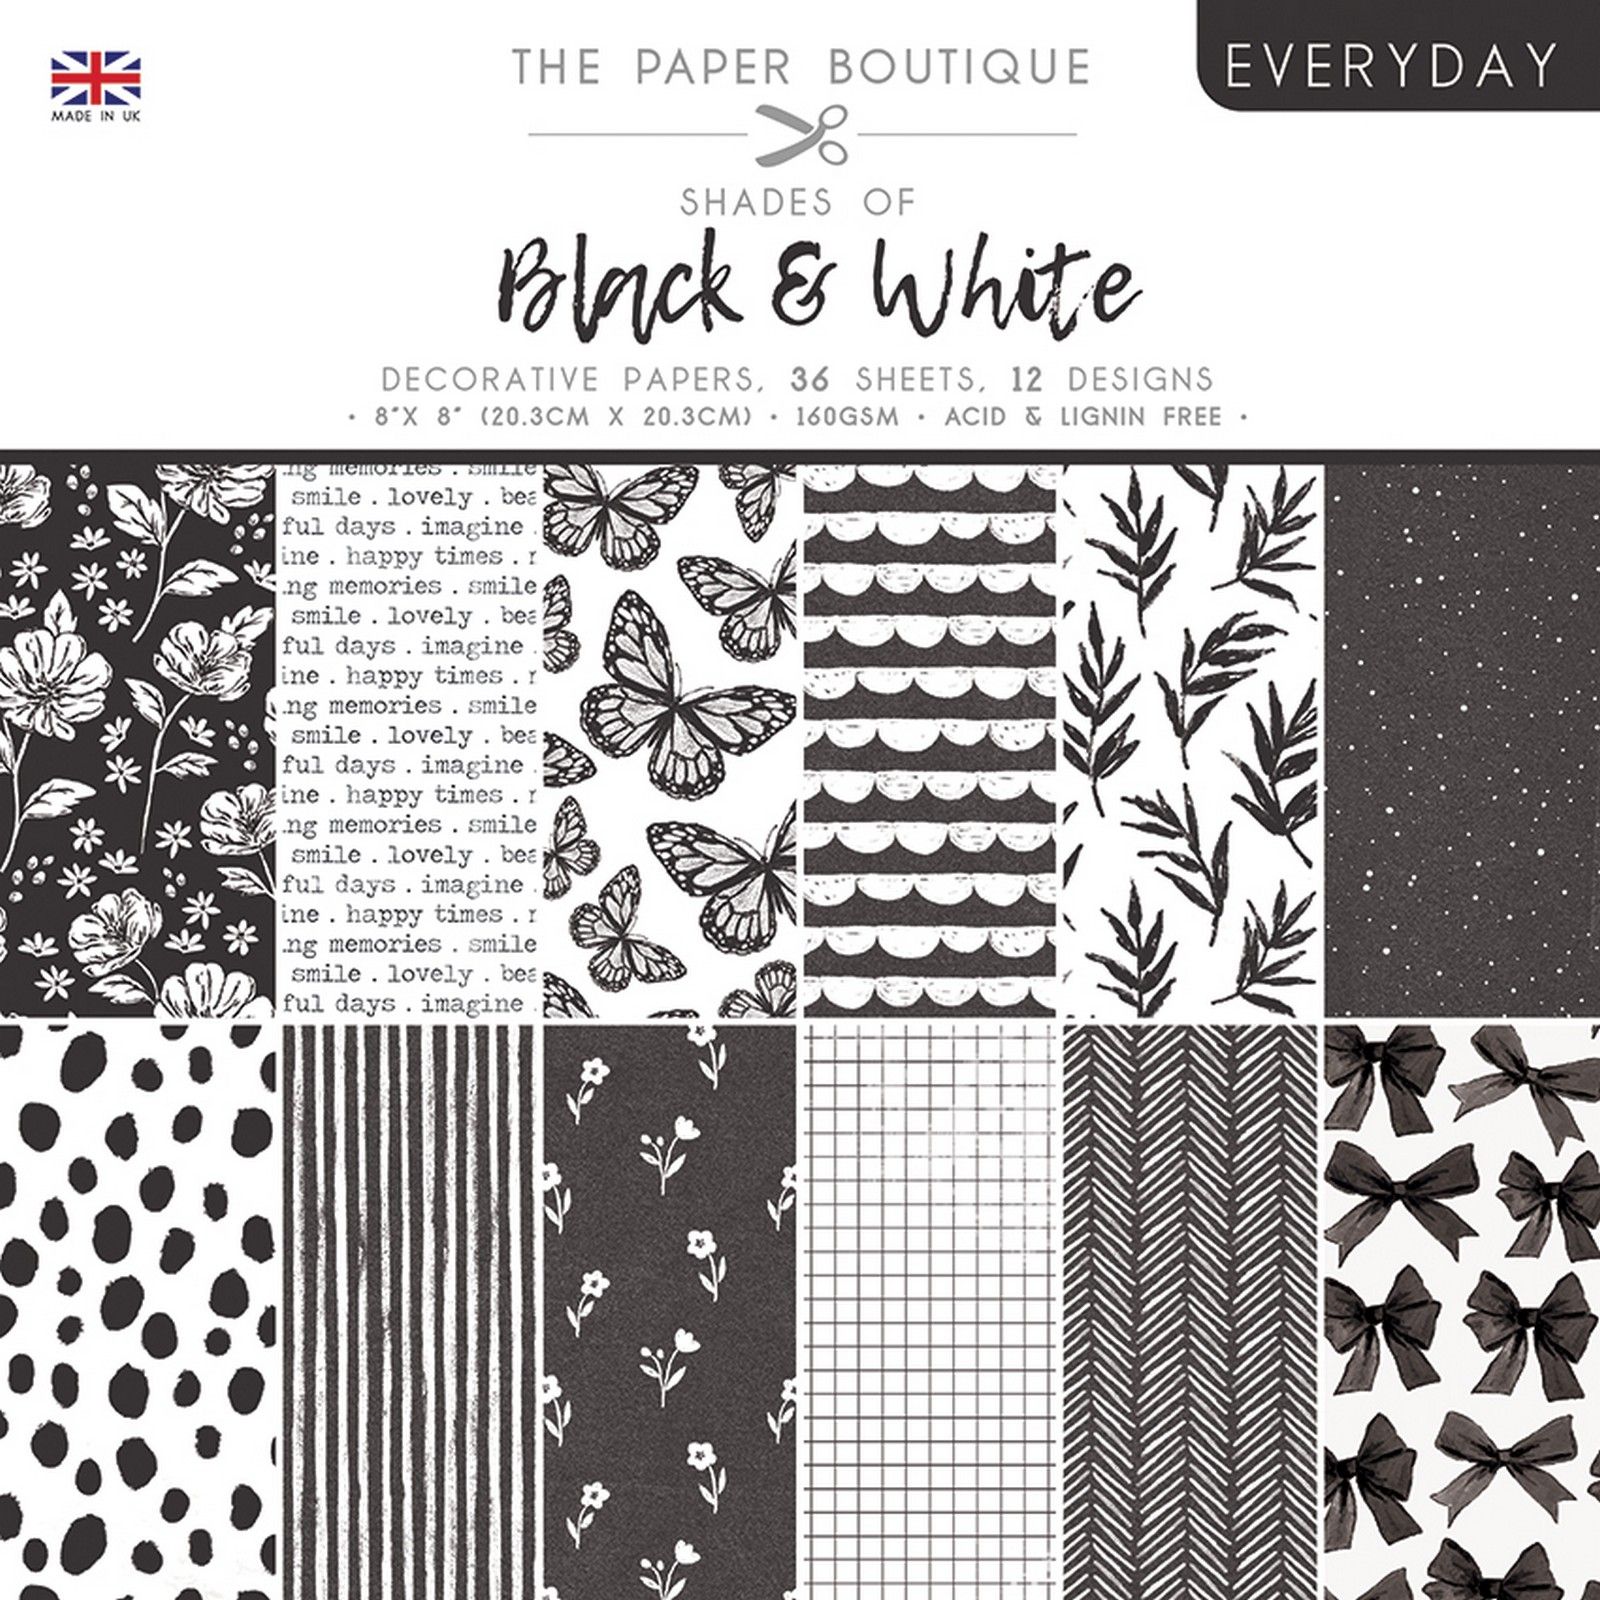 The Paper Boutique • Everyday shades of black & white decorative papers